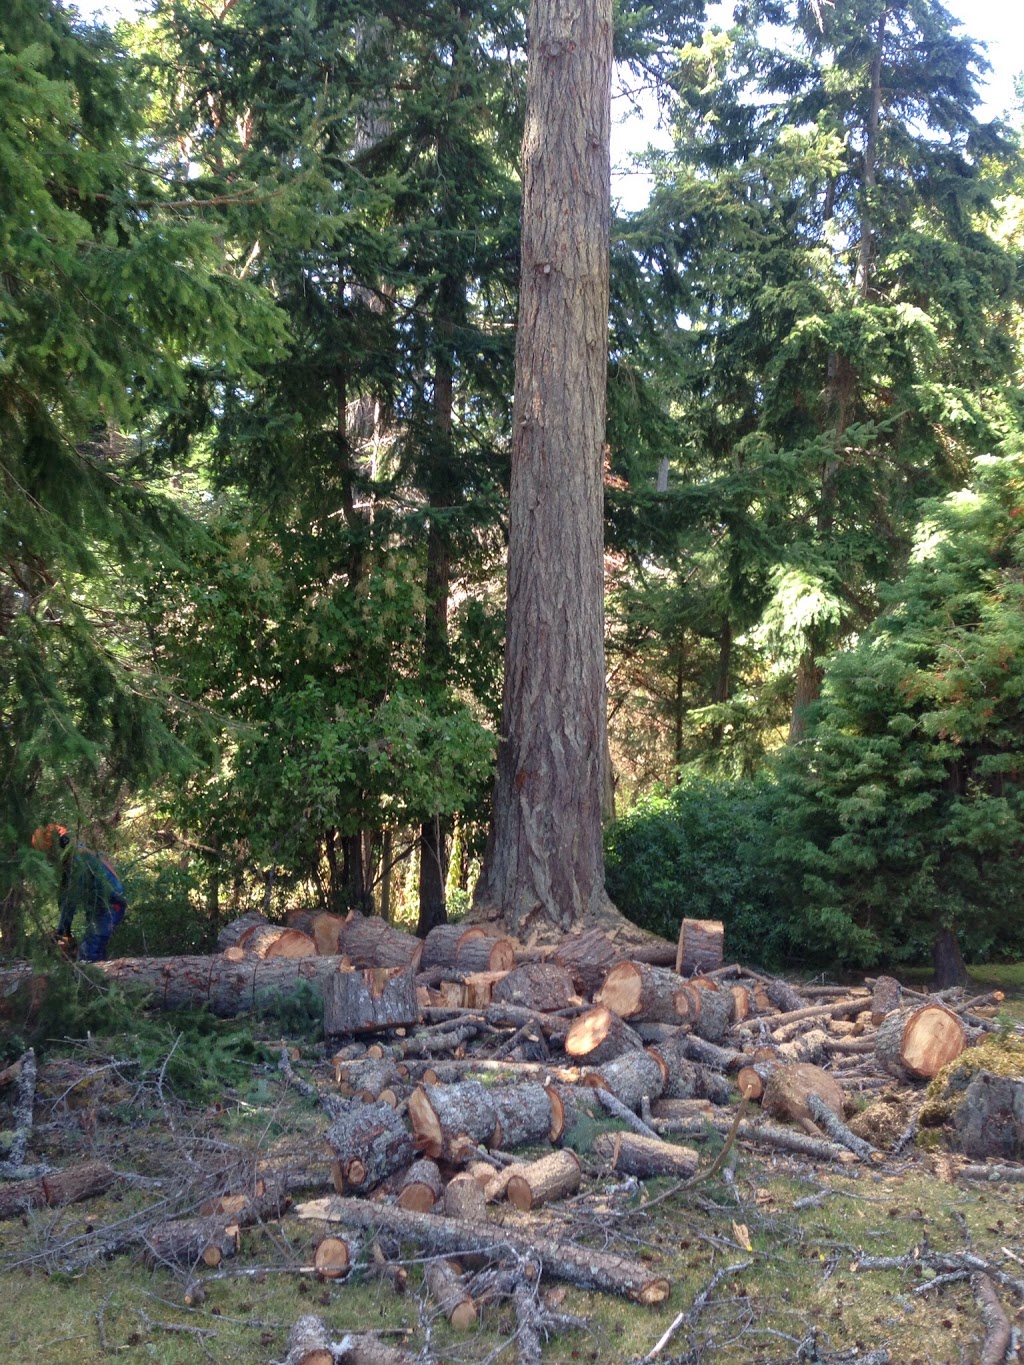 Adams Tree Service | point of interest | 4701 Cardsview Terrace, Victoria, BC V9C 4E9, Canada | 2505168315 OR +1 250-516-8315